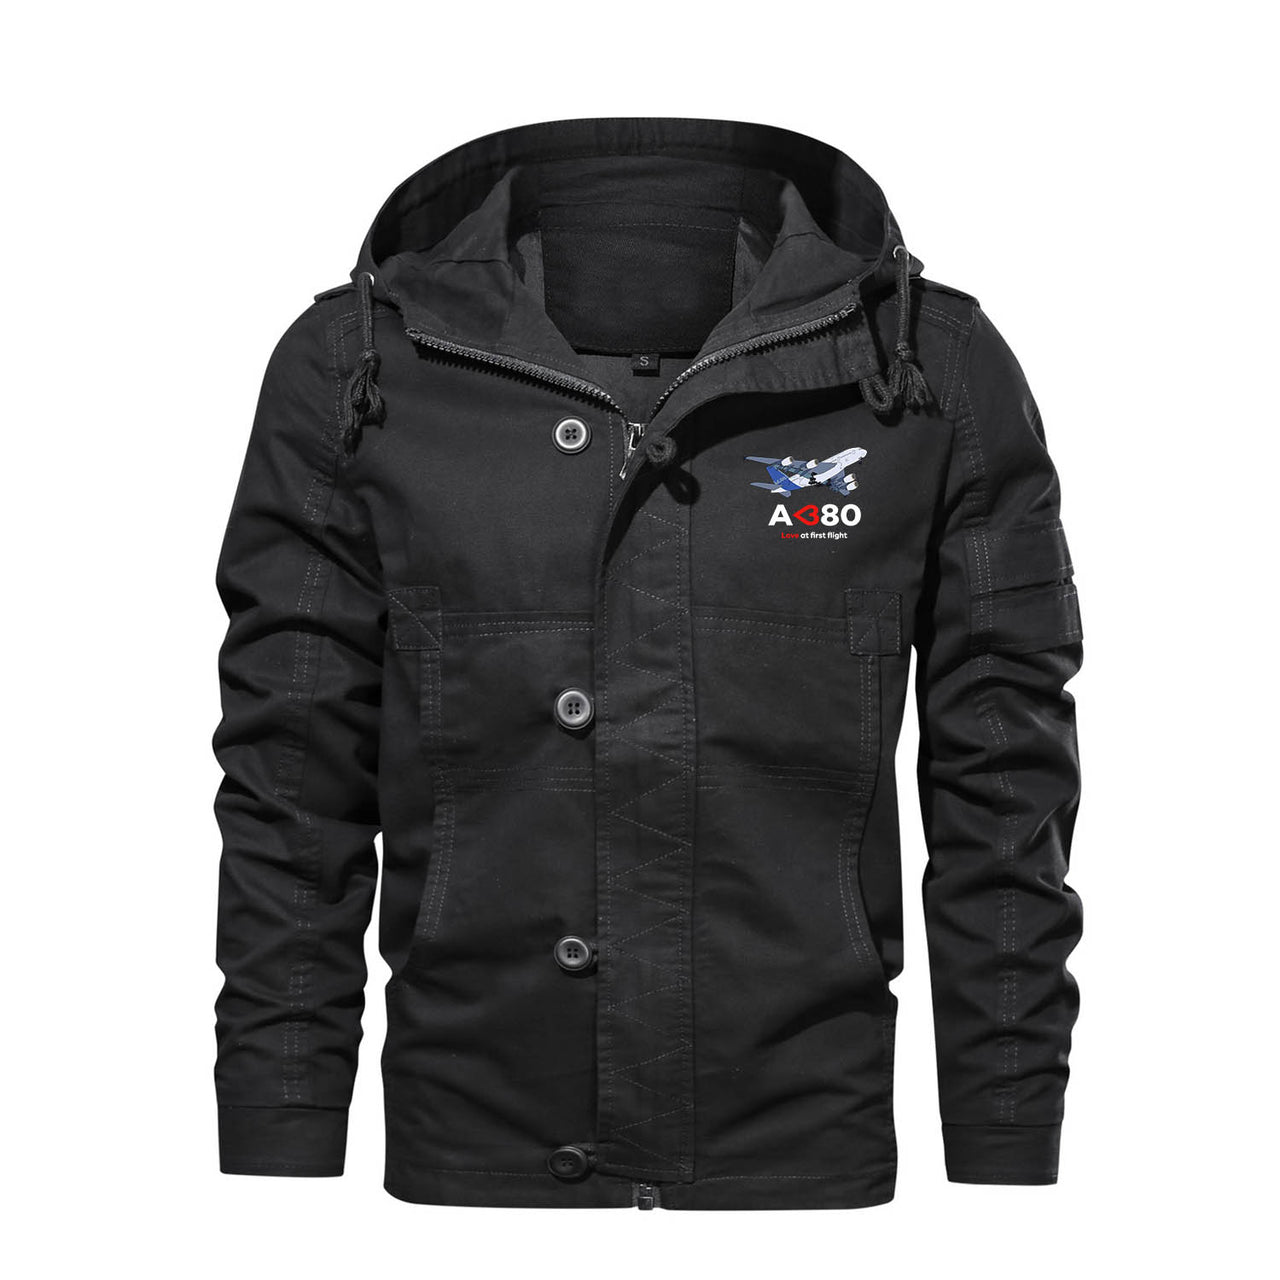 Airbus A380 Love at first flight Designed Cotton Jackets